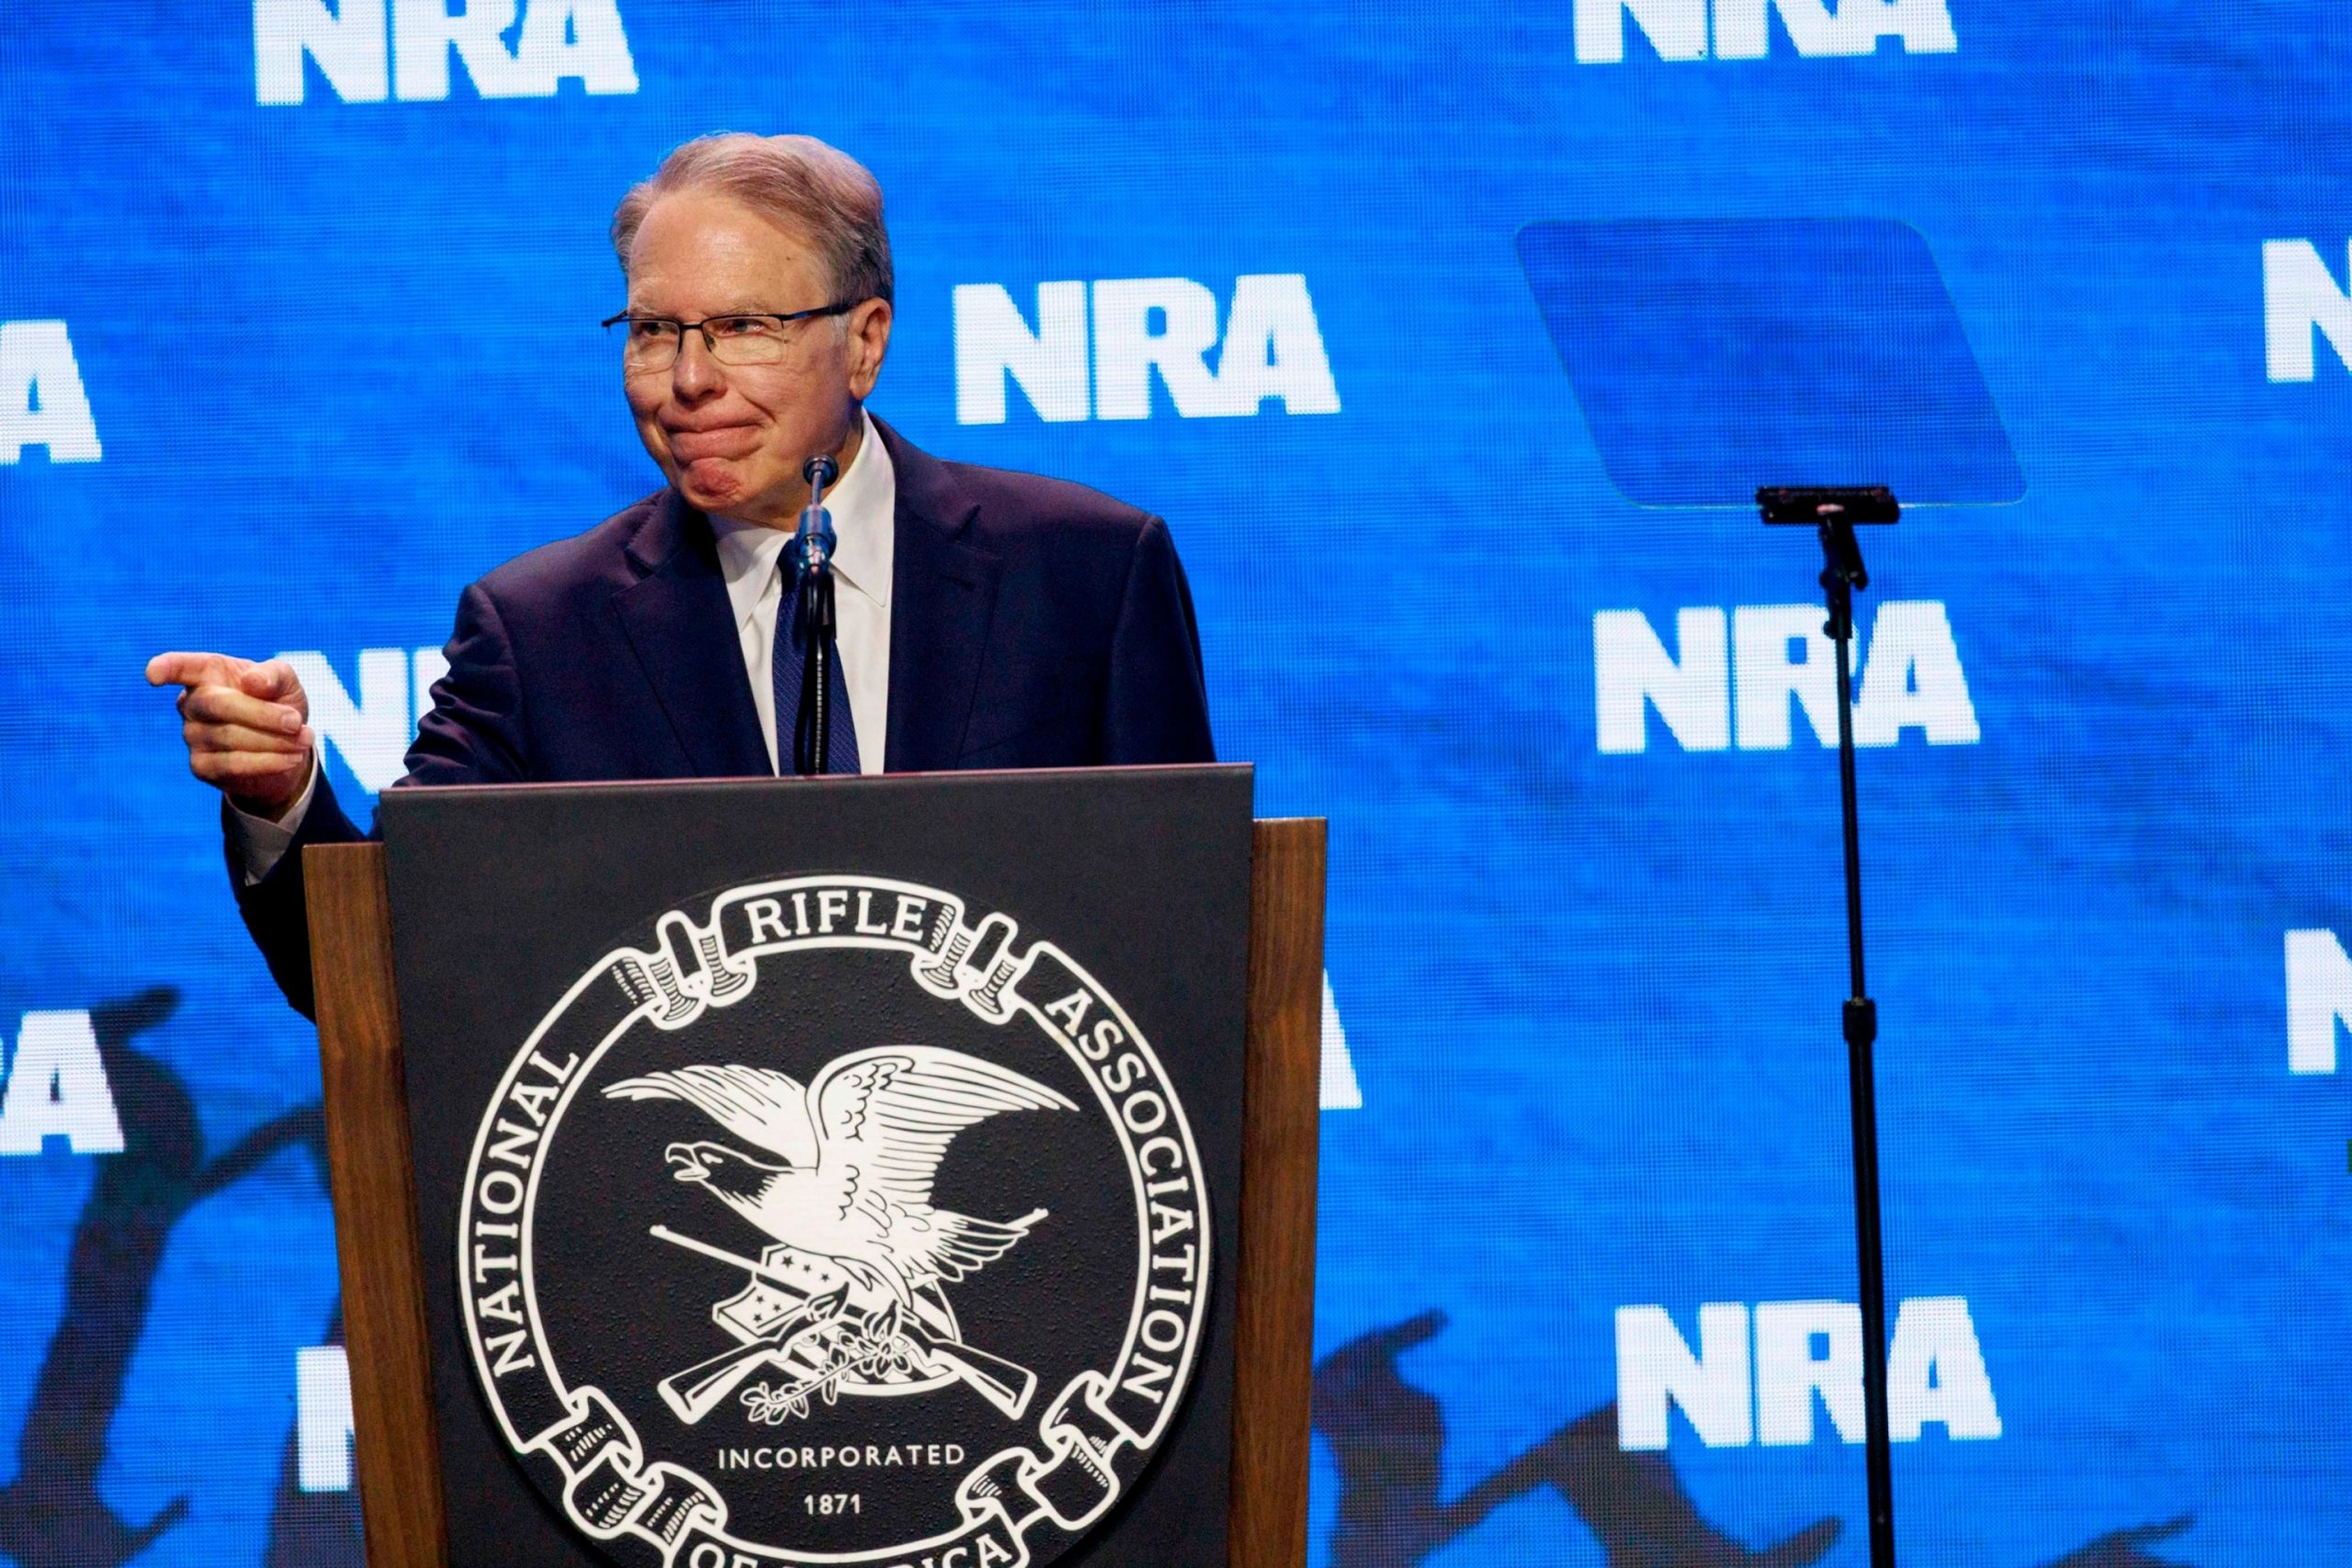 Former NRA executive pleads guilty to fraud and agrees to provide testimony in New York Attorney General trial